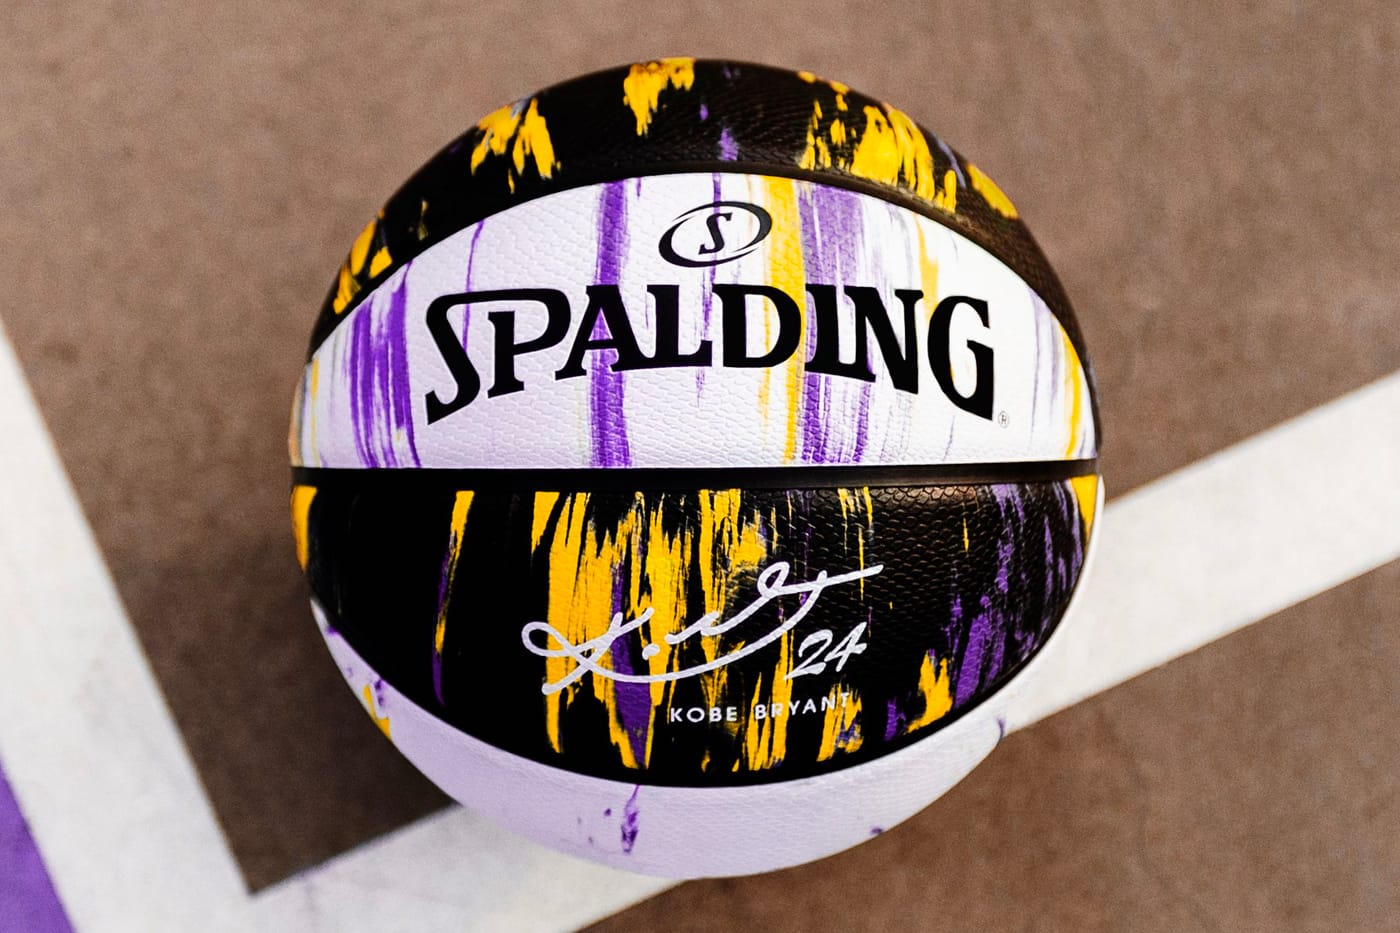 Details about   SPALDING X KOBE BRYANT MAMBA MARBLE SERIES BASKETBALL LIMITED SOLD OUT 